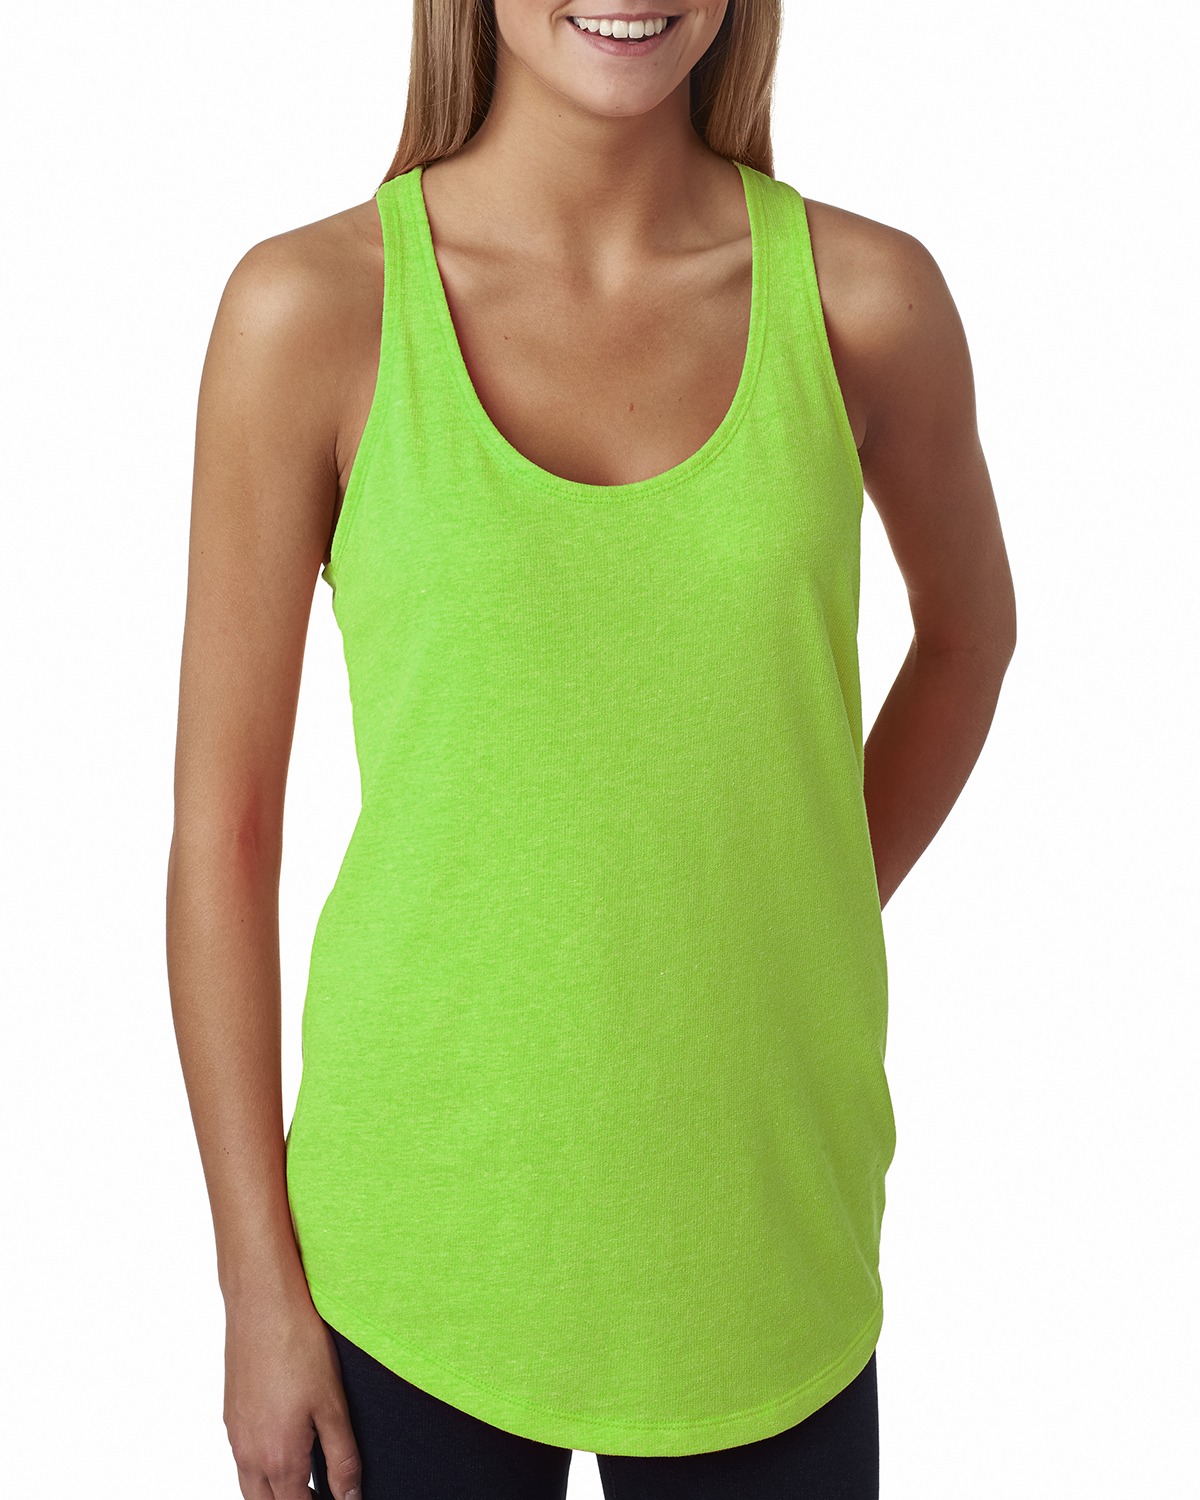 click to view Neon Heather Green